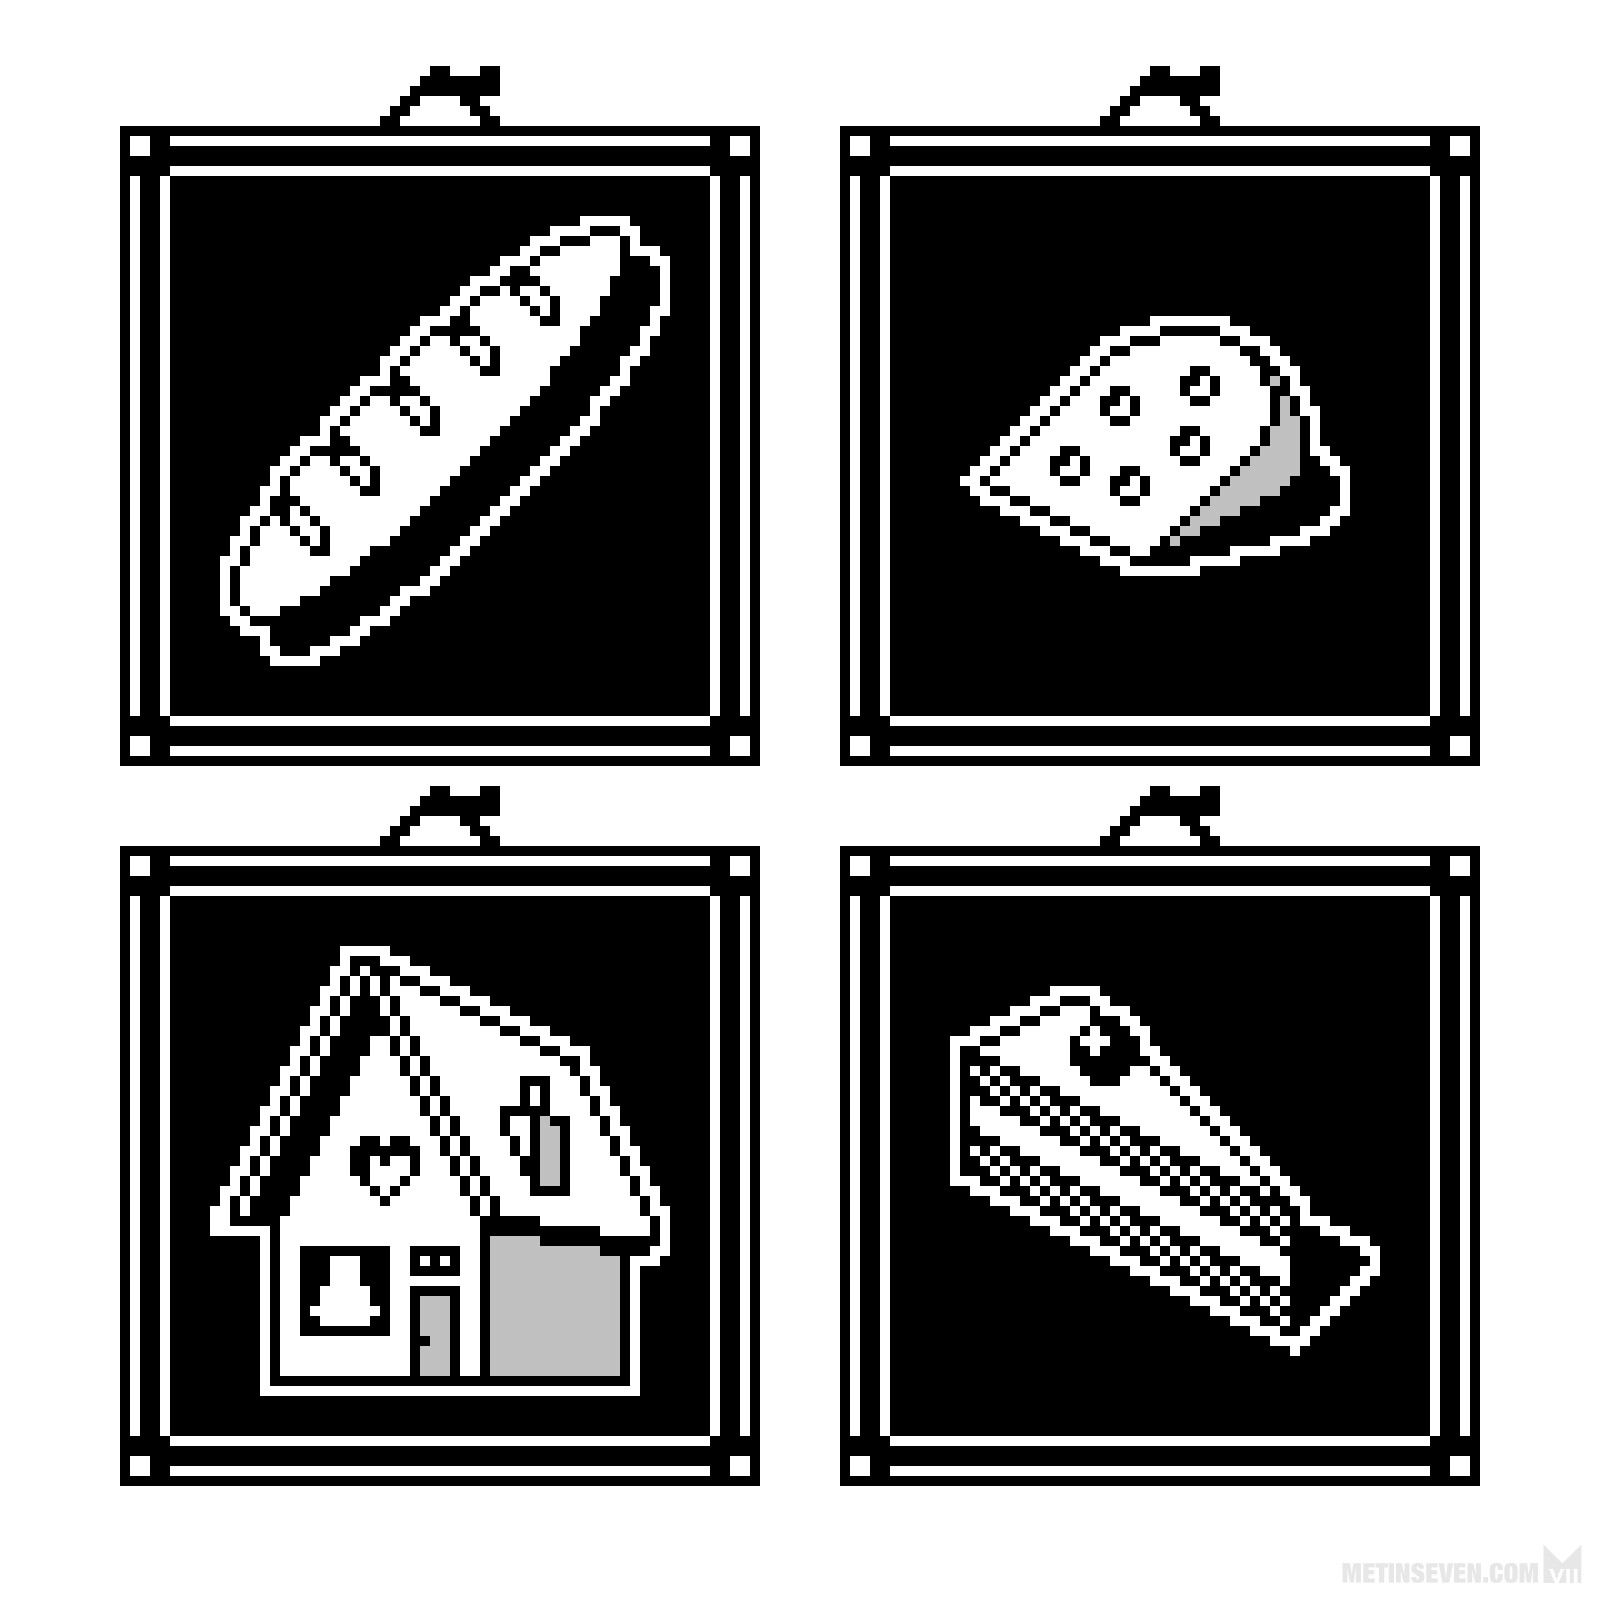 Black and white pixel art icons